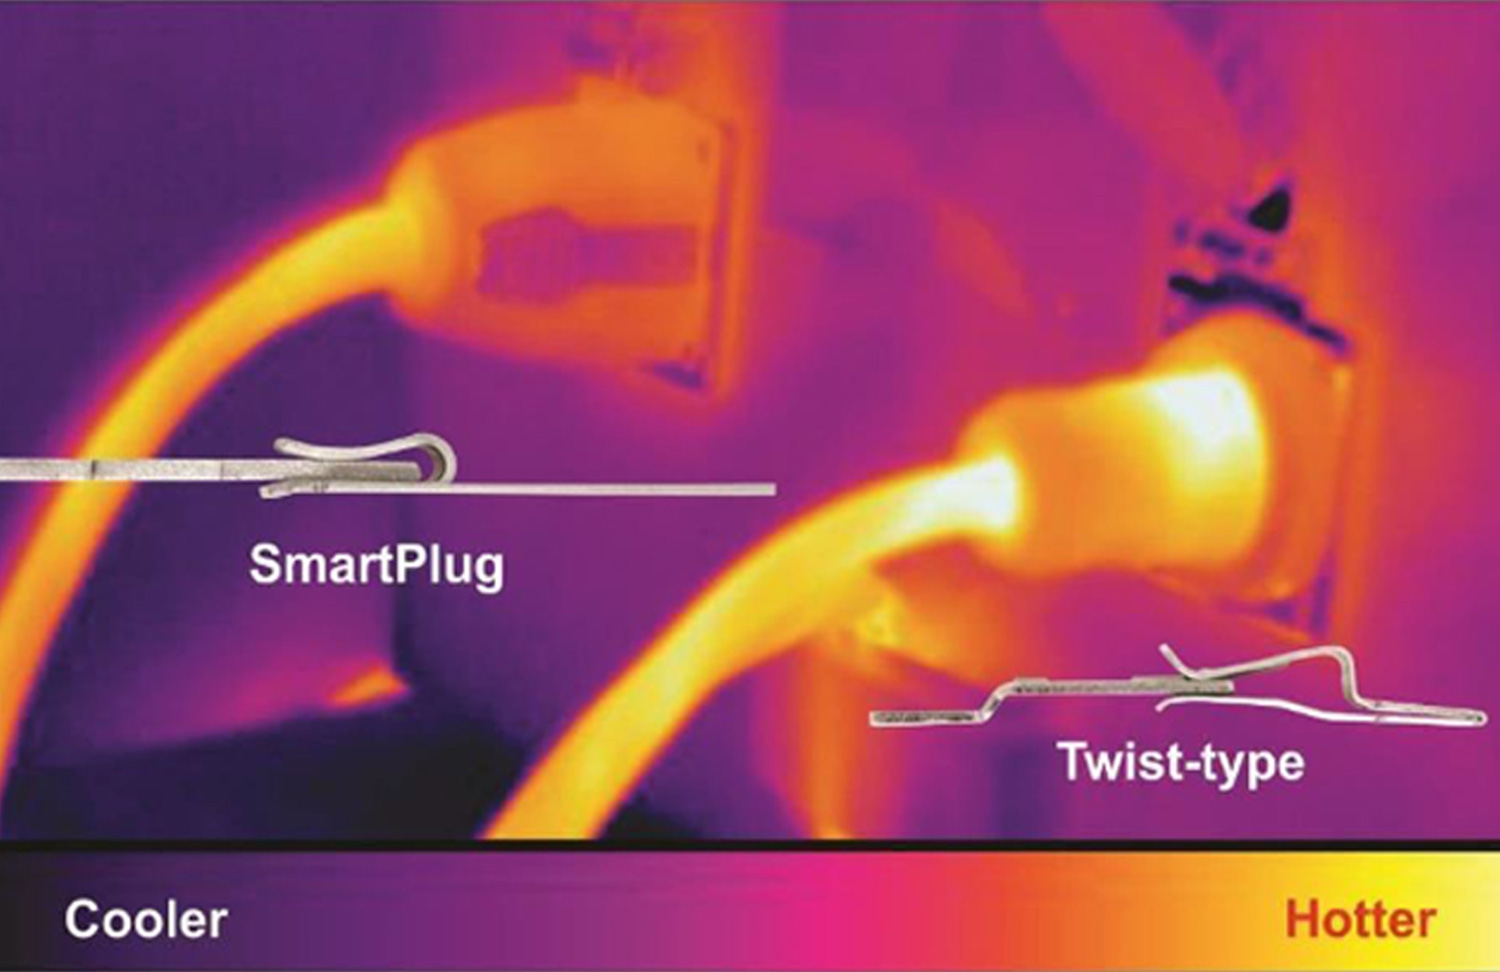 a thermal comparison of the SmartPlug and a typical twist-lock